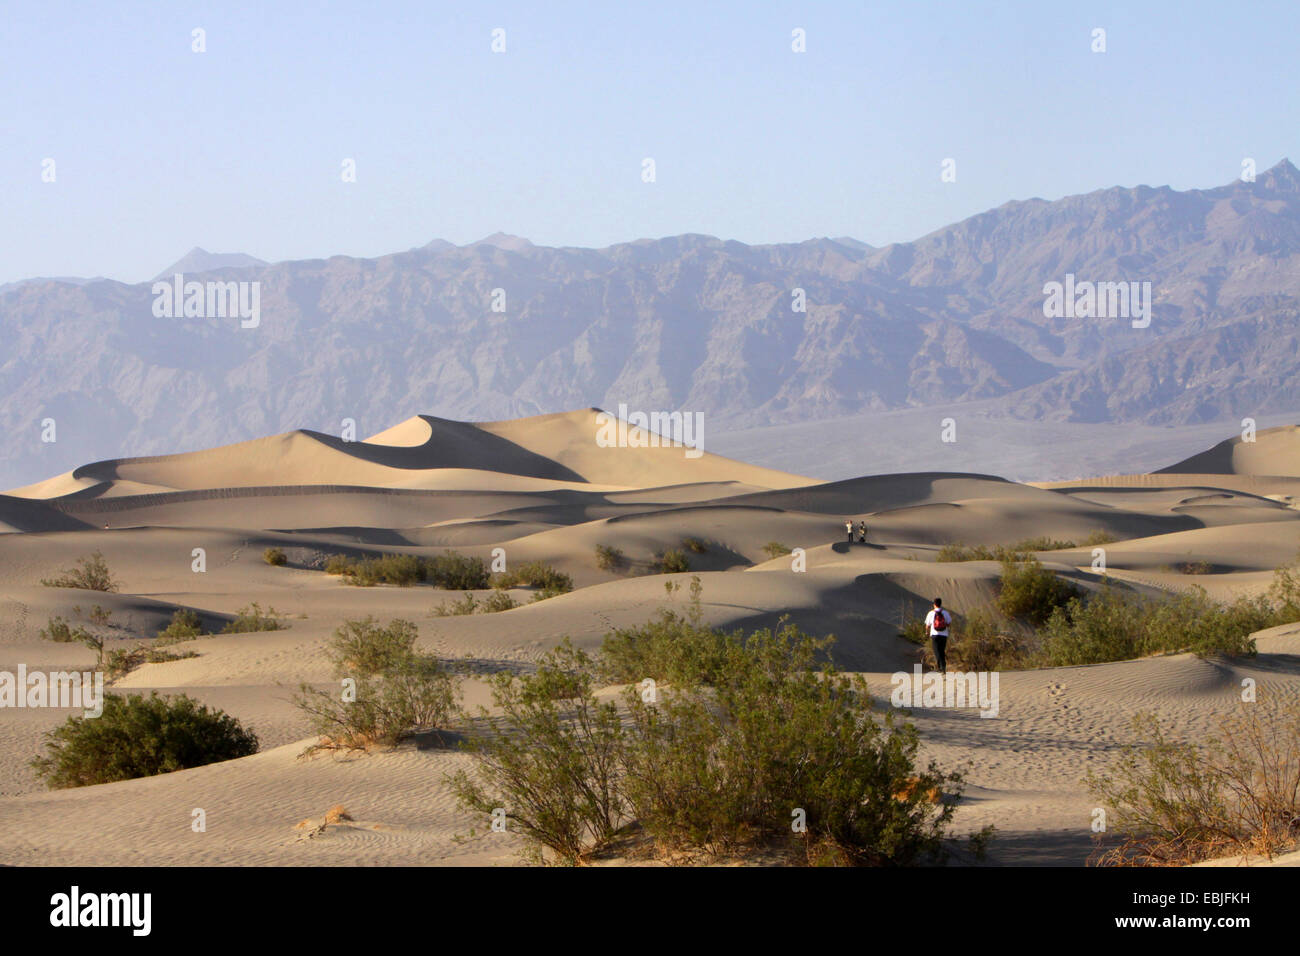 wanderers in the sand dunes in front of looming rock wall, USA, California, Death-Valley-Nationalpark, Stovepipe Wells Stock Photo